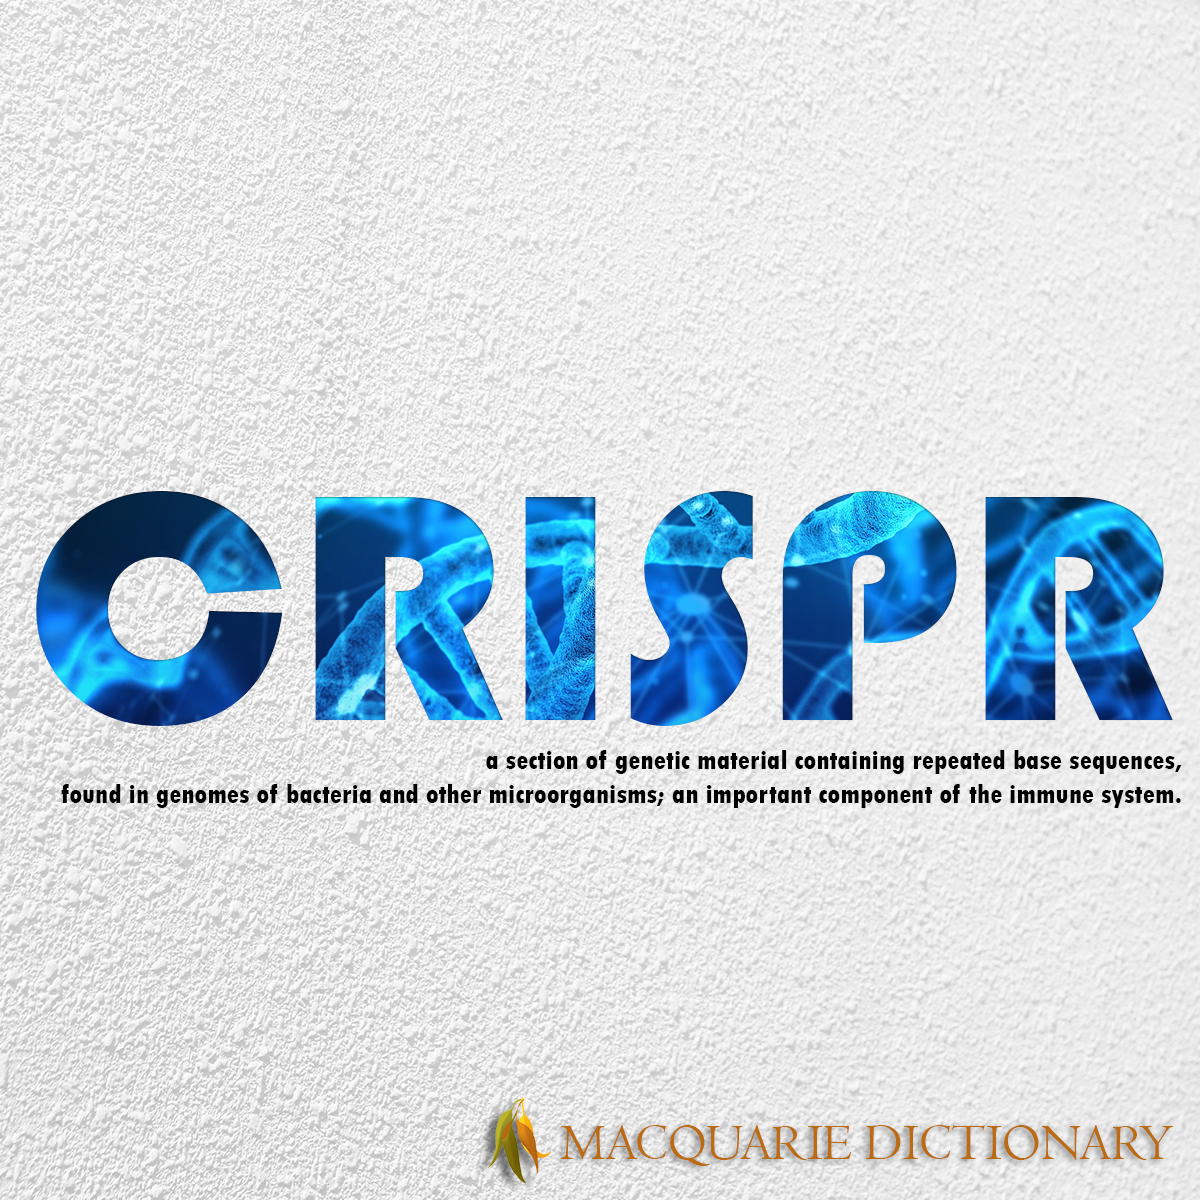 Image of Macquarie Dictionary Word of the Year - CRISPR - a technology which enables editing of a genome by adding, removing, or altering a section of DNA sequence; potentially able to correct genetic defects, treat diseases, etc.